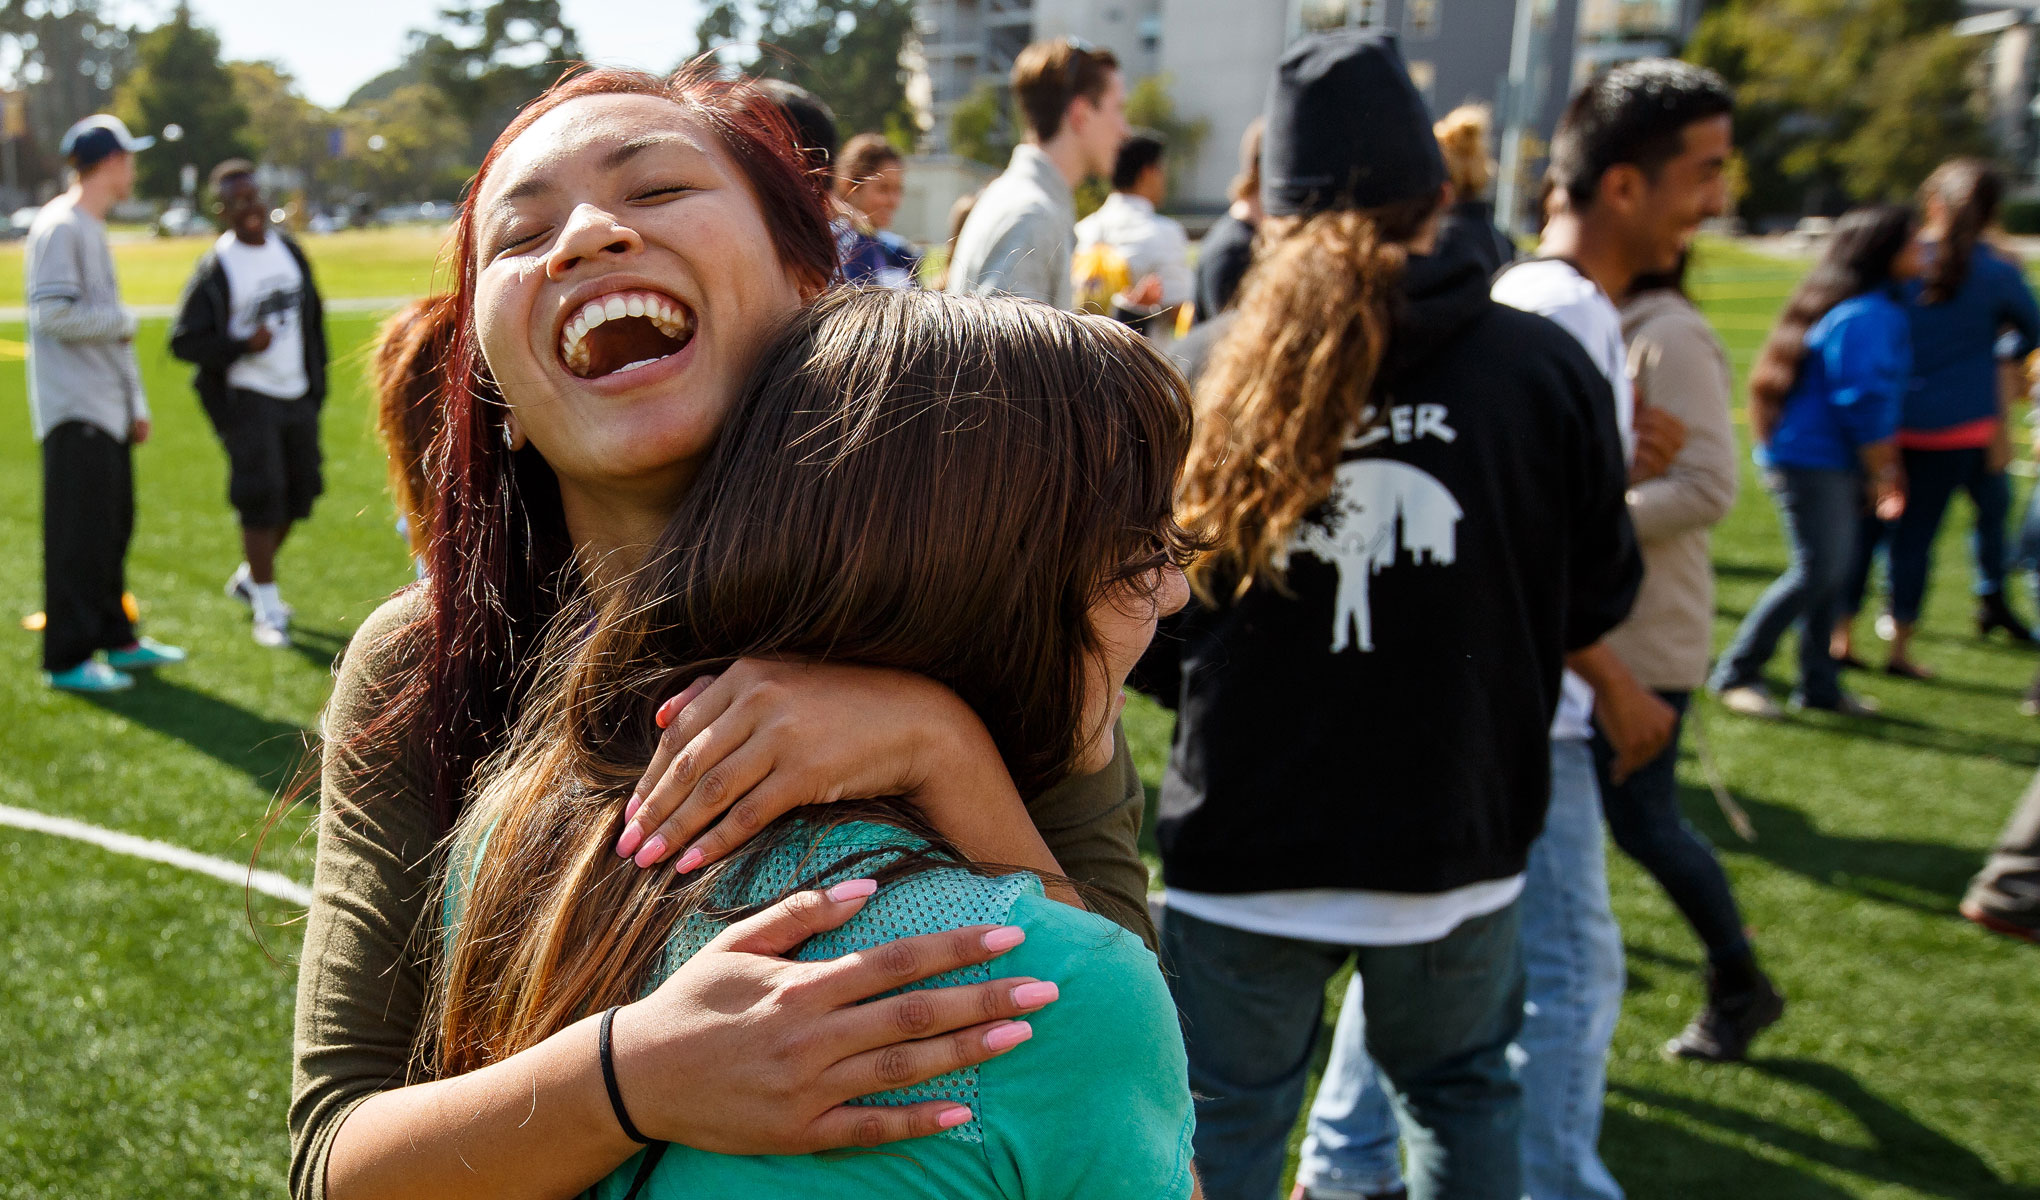 Students at an SF State event